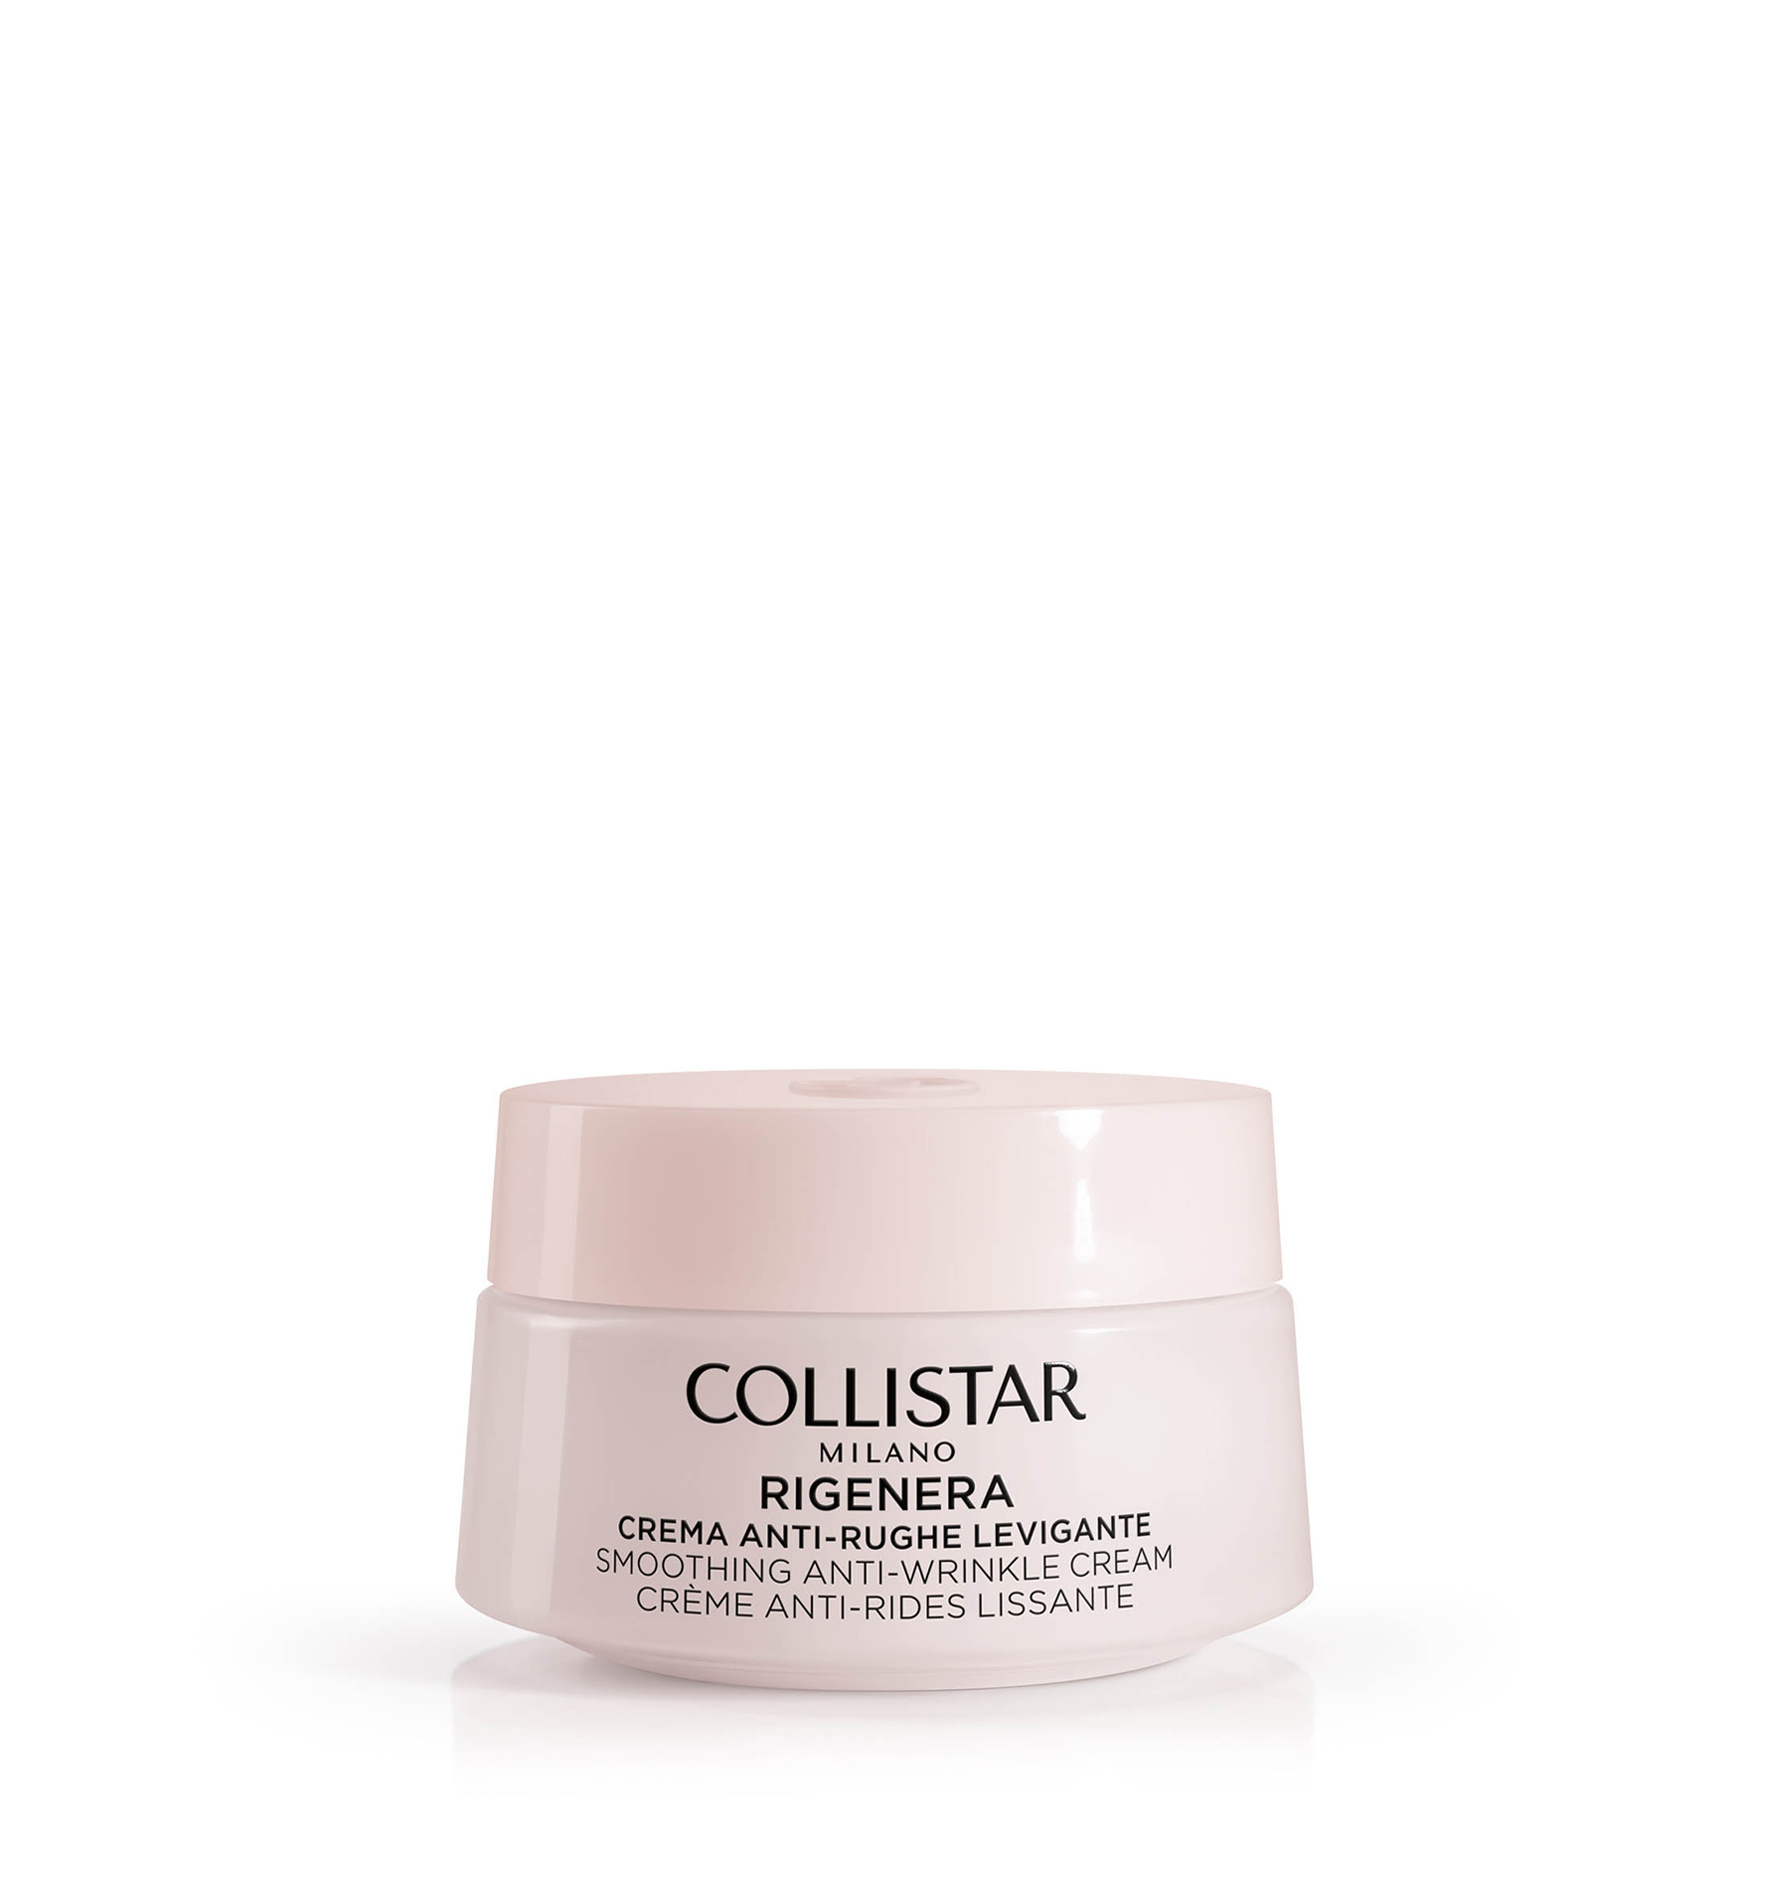 RIGENERA SMOOTHING ANTI-WRINKLE CREAM - Face | Collistar - Shop Online Ufficiale